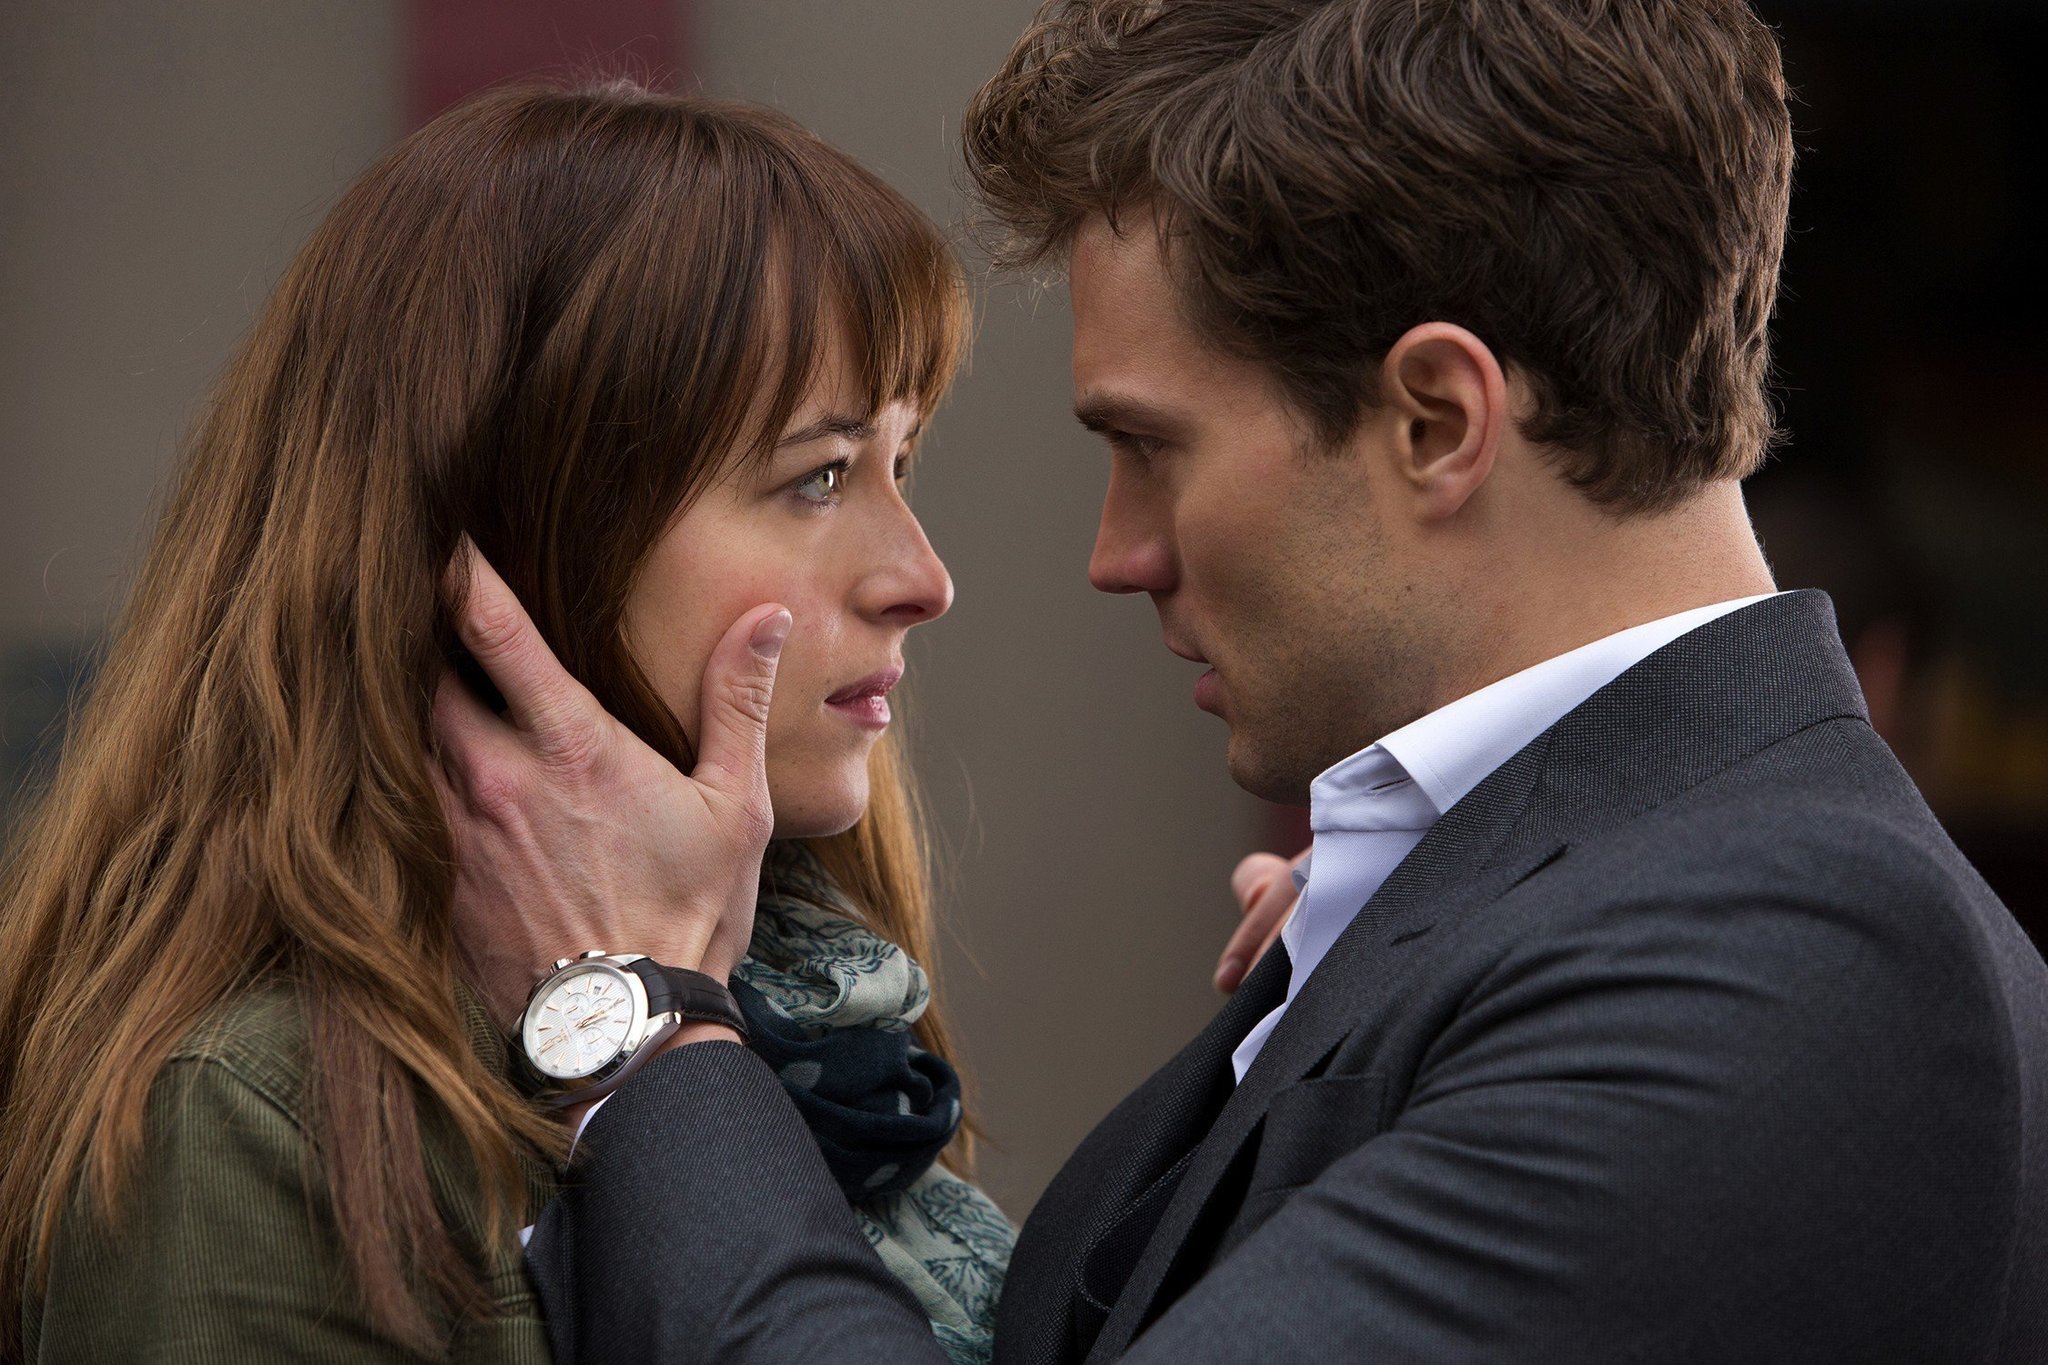 A Psychiatrist’s Letter to Young People about Fifty Shades of Grey